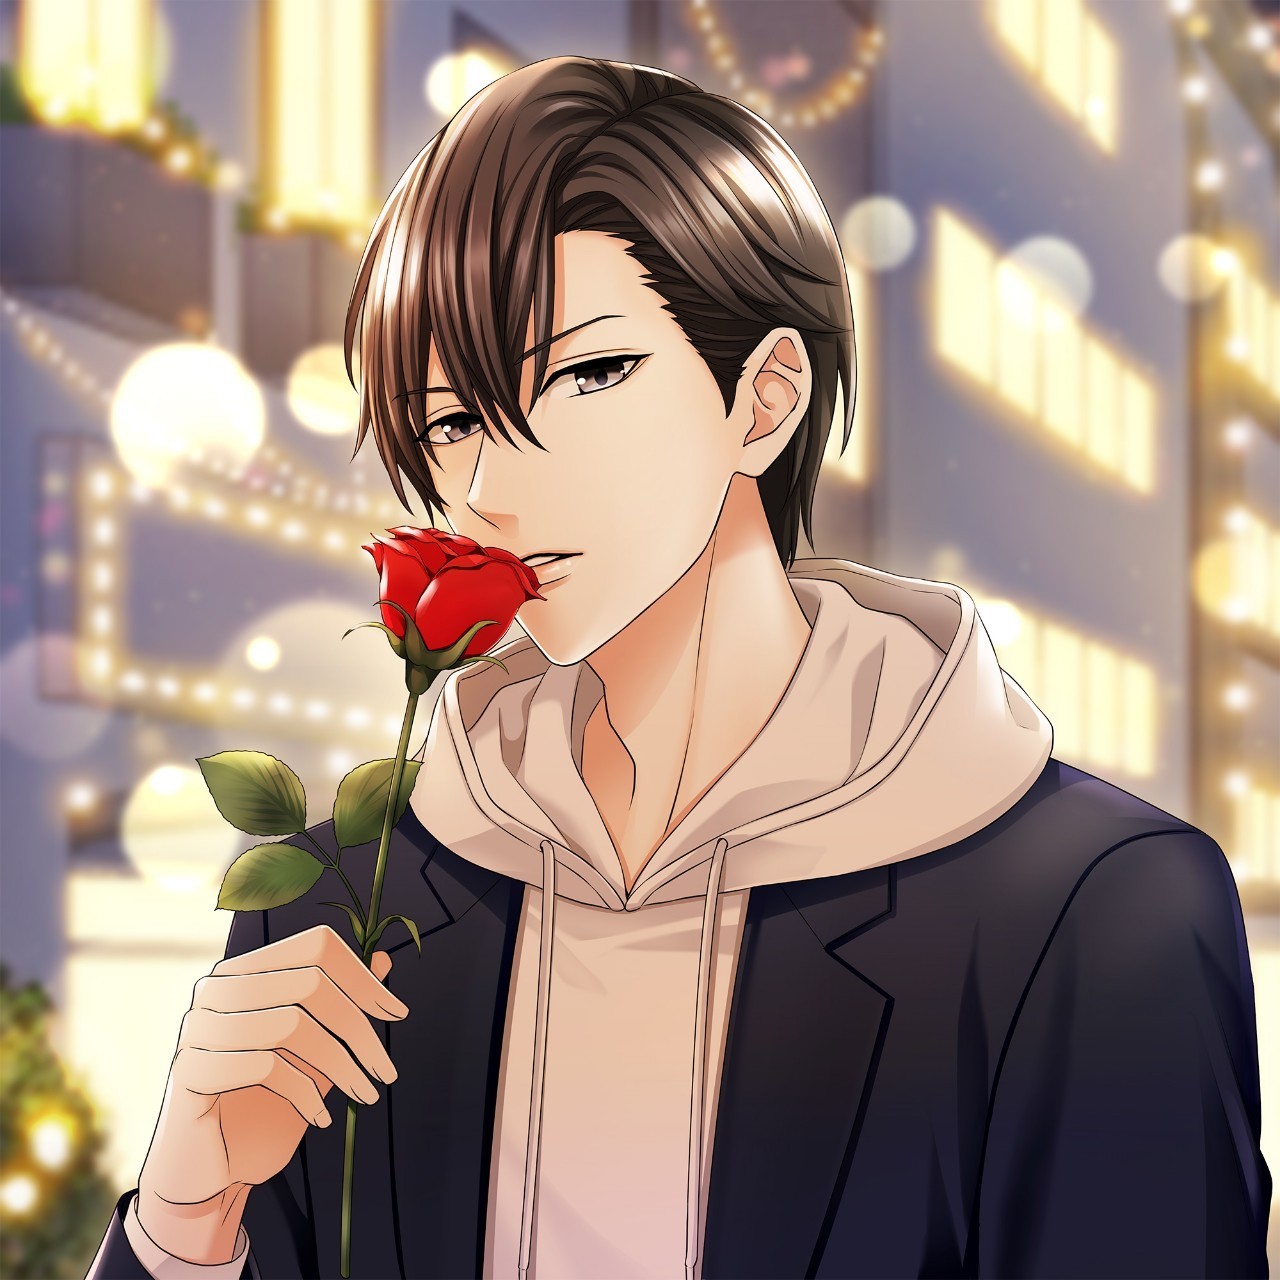 Dr. Kasumi from Voltage's Romance MD as he smells a rose. 